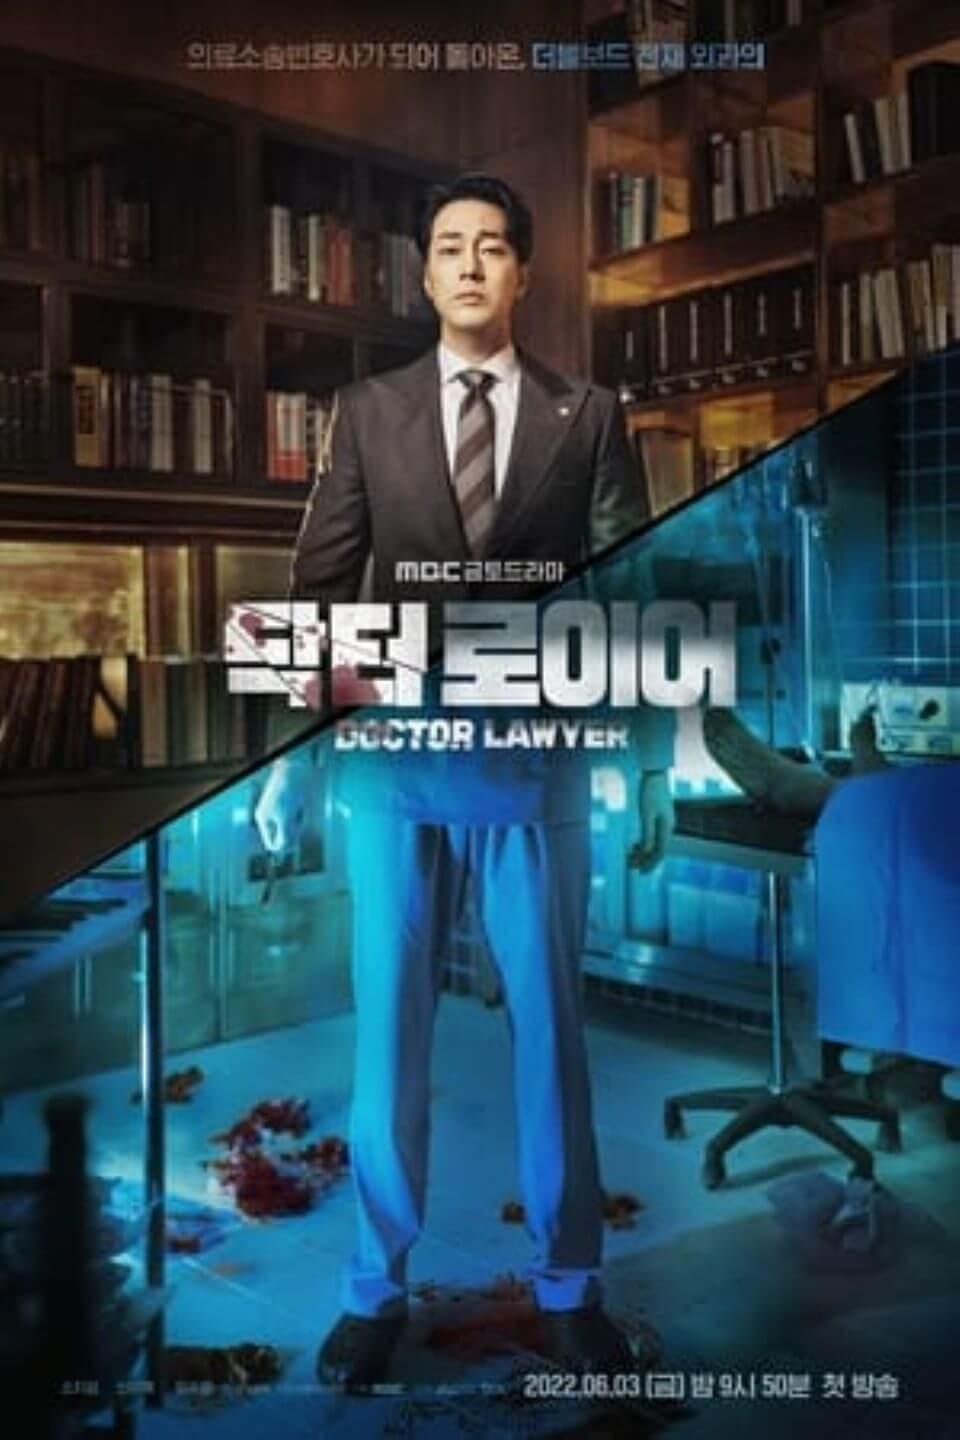 TV ratings for Doctor Lawyer (닥터 로이어) in Colombia. MBC TV series